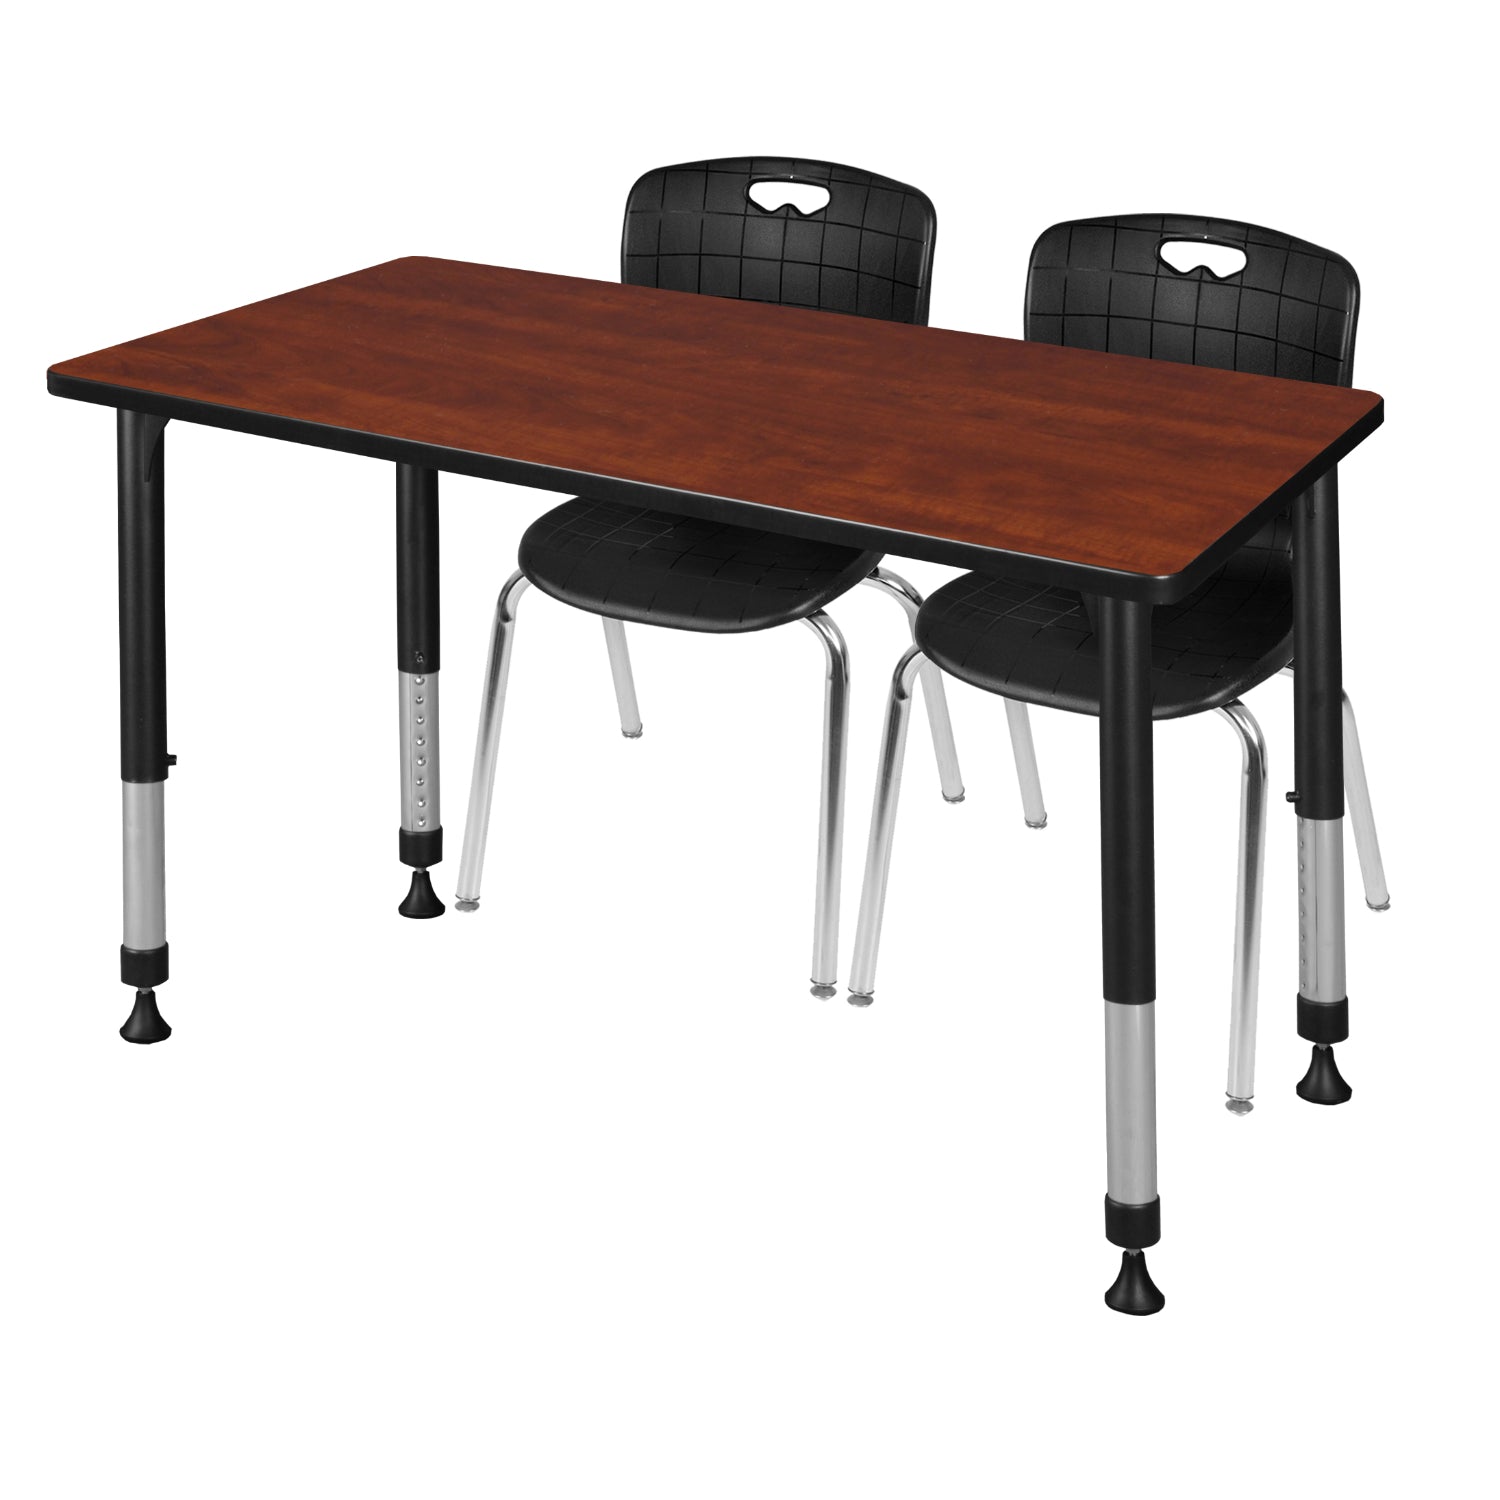 Kee Classroom Table and Chair Package, Kee 48" x 30" Rectangular Adjustable Height Table with 2 Andy 18" Stack Chairs